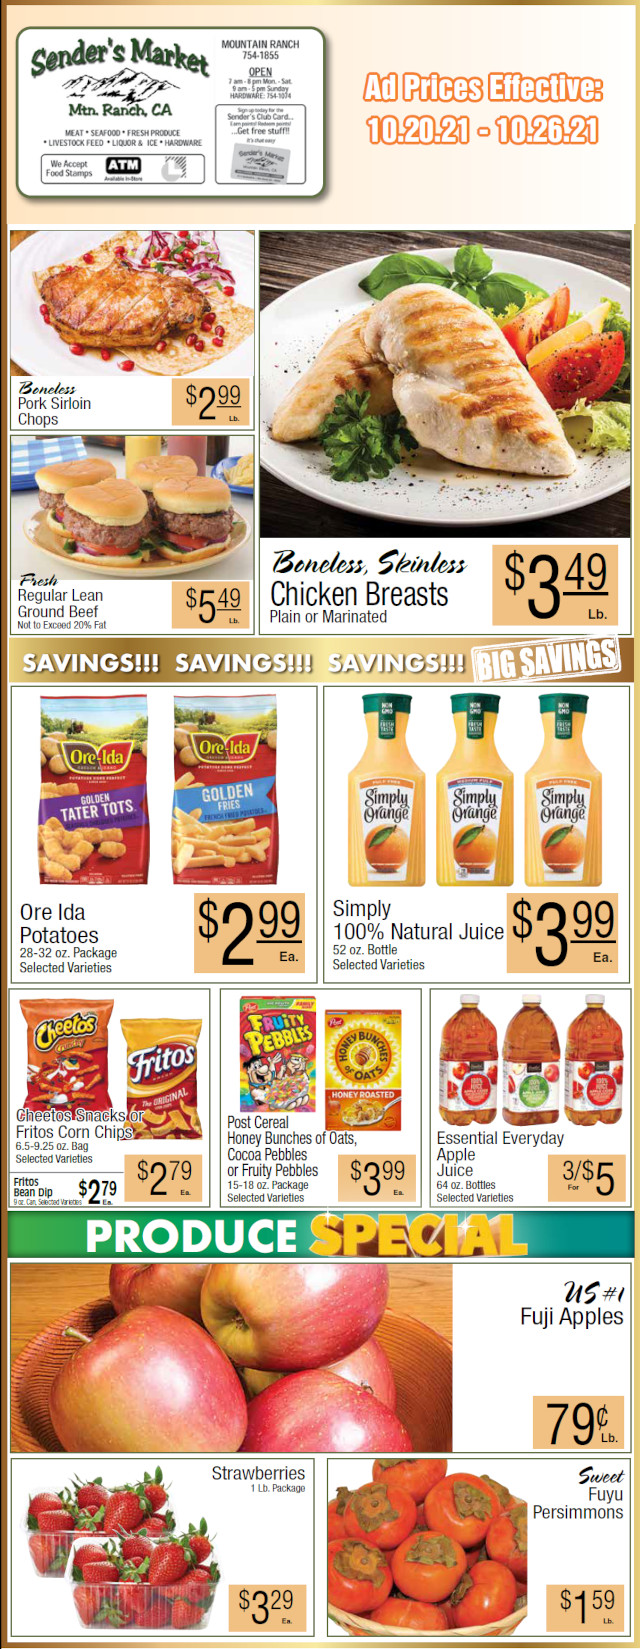 Sender’s Market’s Weekly Ad & Grocery Specials Through October 26th! Shop Local & Save!